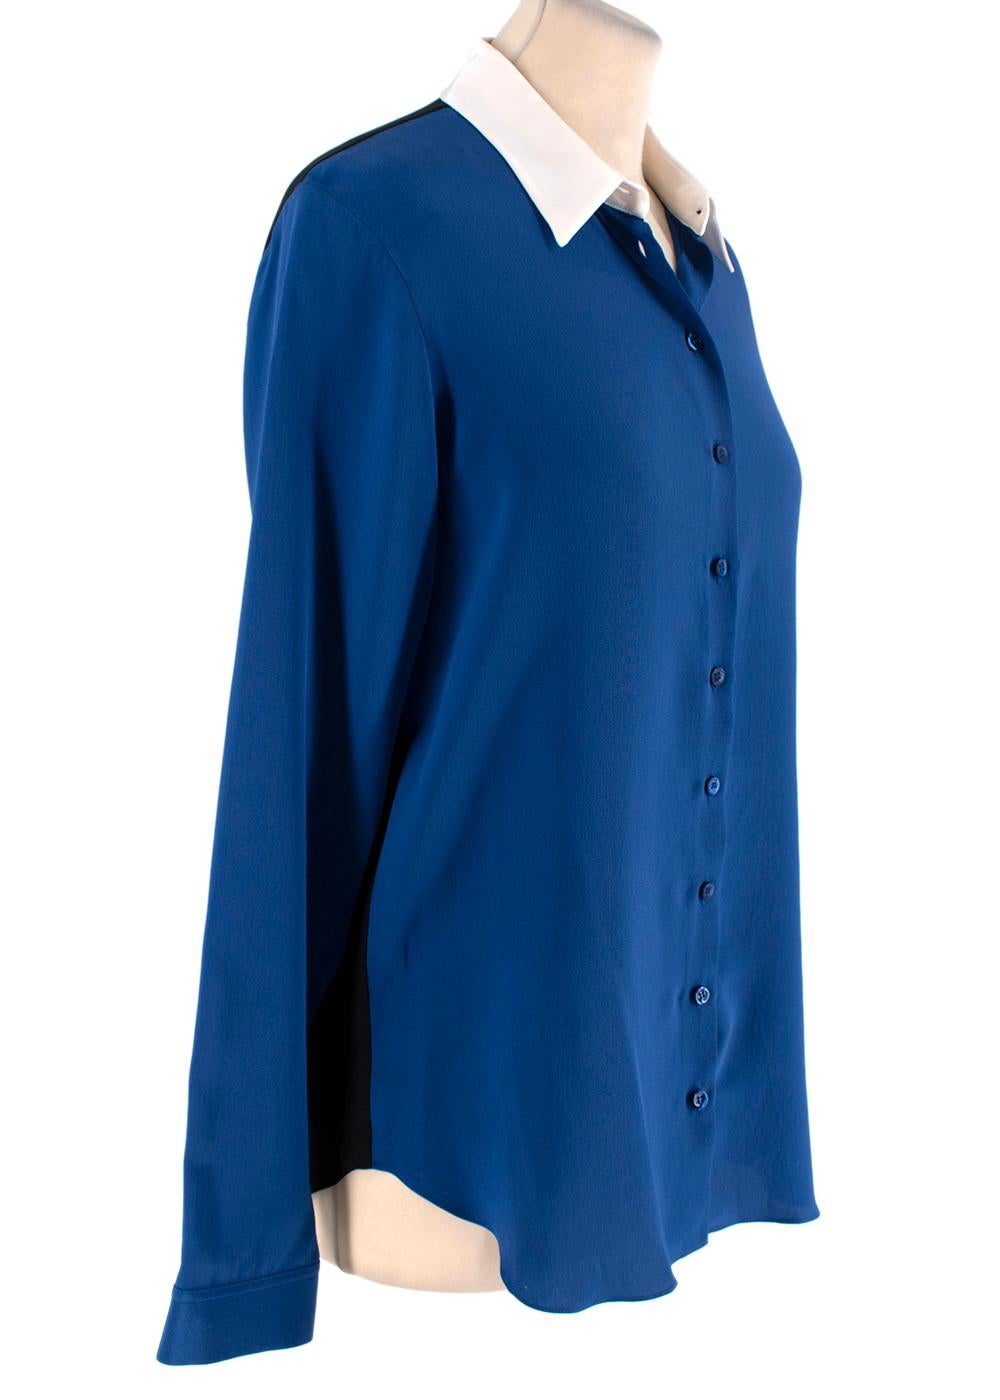 Christian Dior Blue & Black Silk Crepe Blouse

- Tricolour blue, black, and ivory silk-crepe blouse
- Button placket
- Contrast classic collar
- Classic fit

Materials:
100% Silk

Made in Italy
Dry clean only

PLEASE NOTE, THESE ITEMS ARE PRE-OWNED